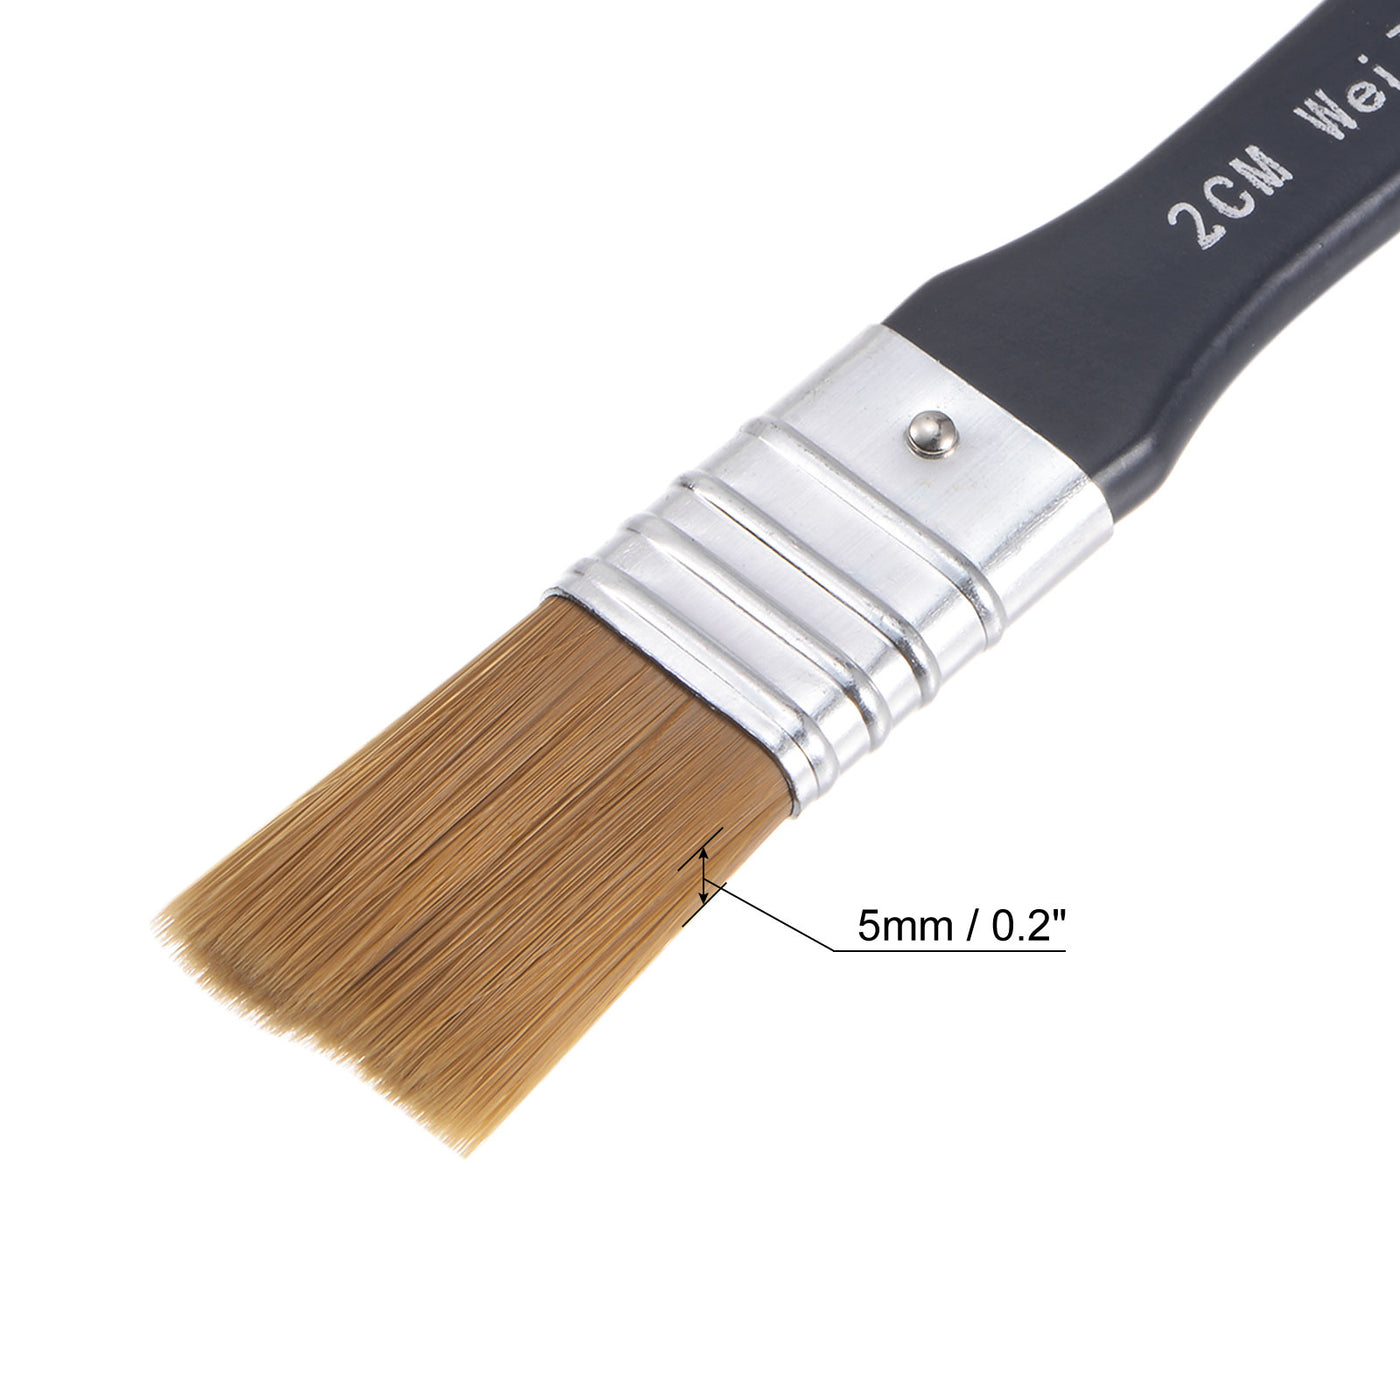 Uxcell Uxcell 1.1" Width Small Paint Brush Natural Bristle with Wood Handle Painting Tool